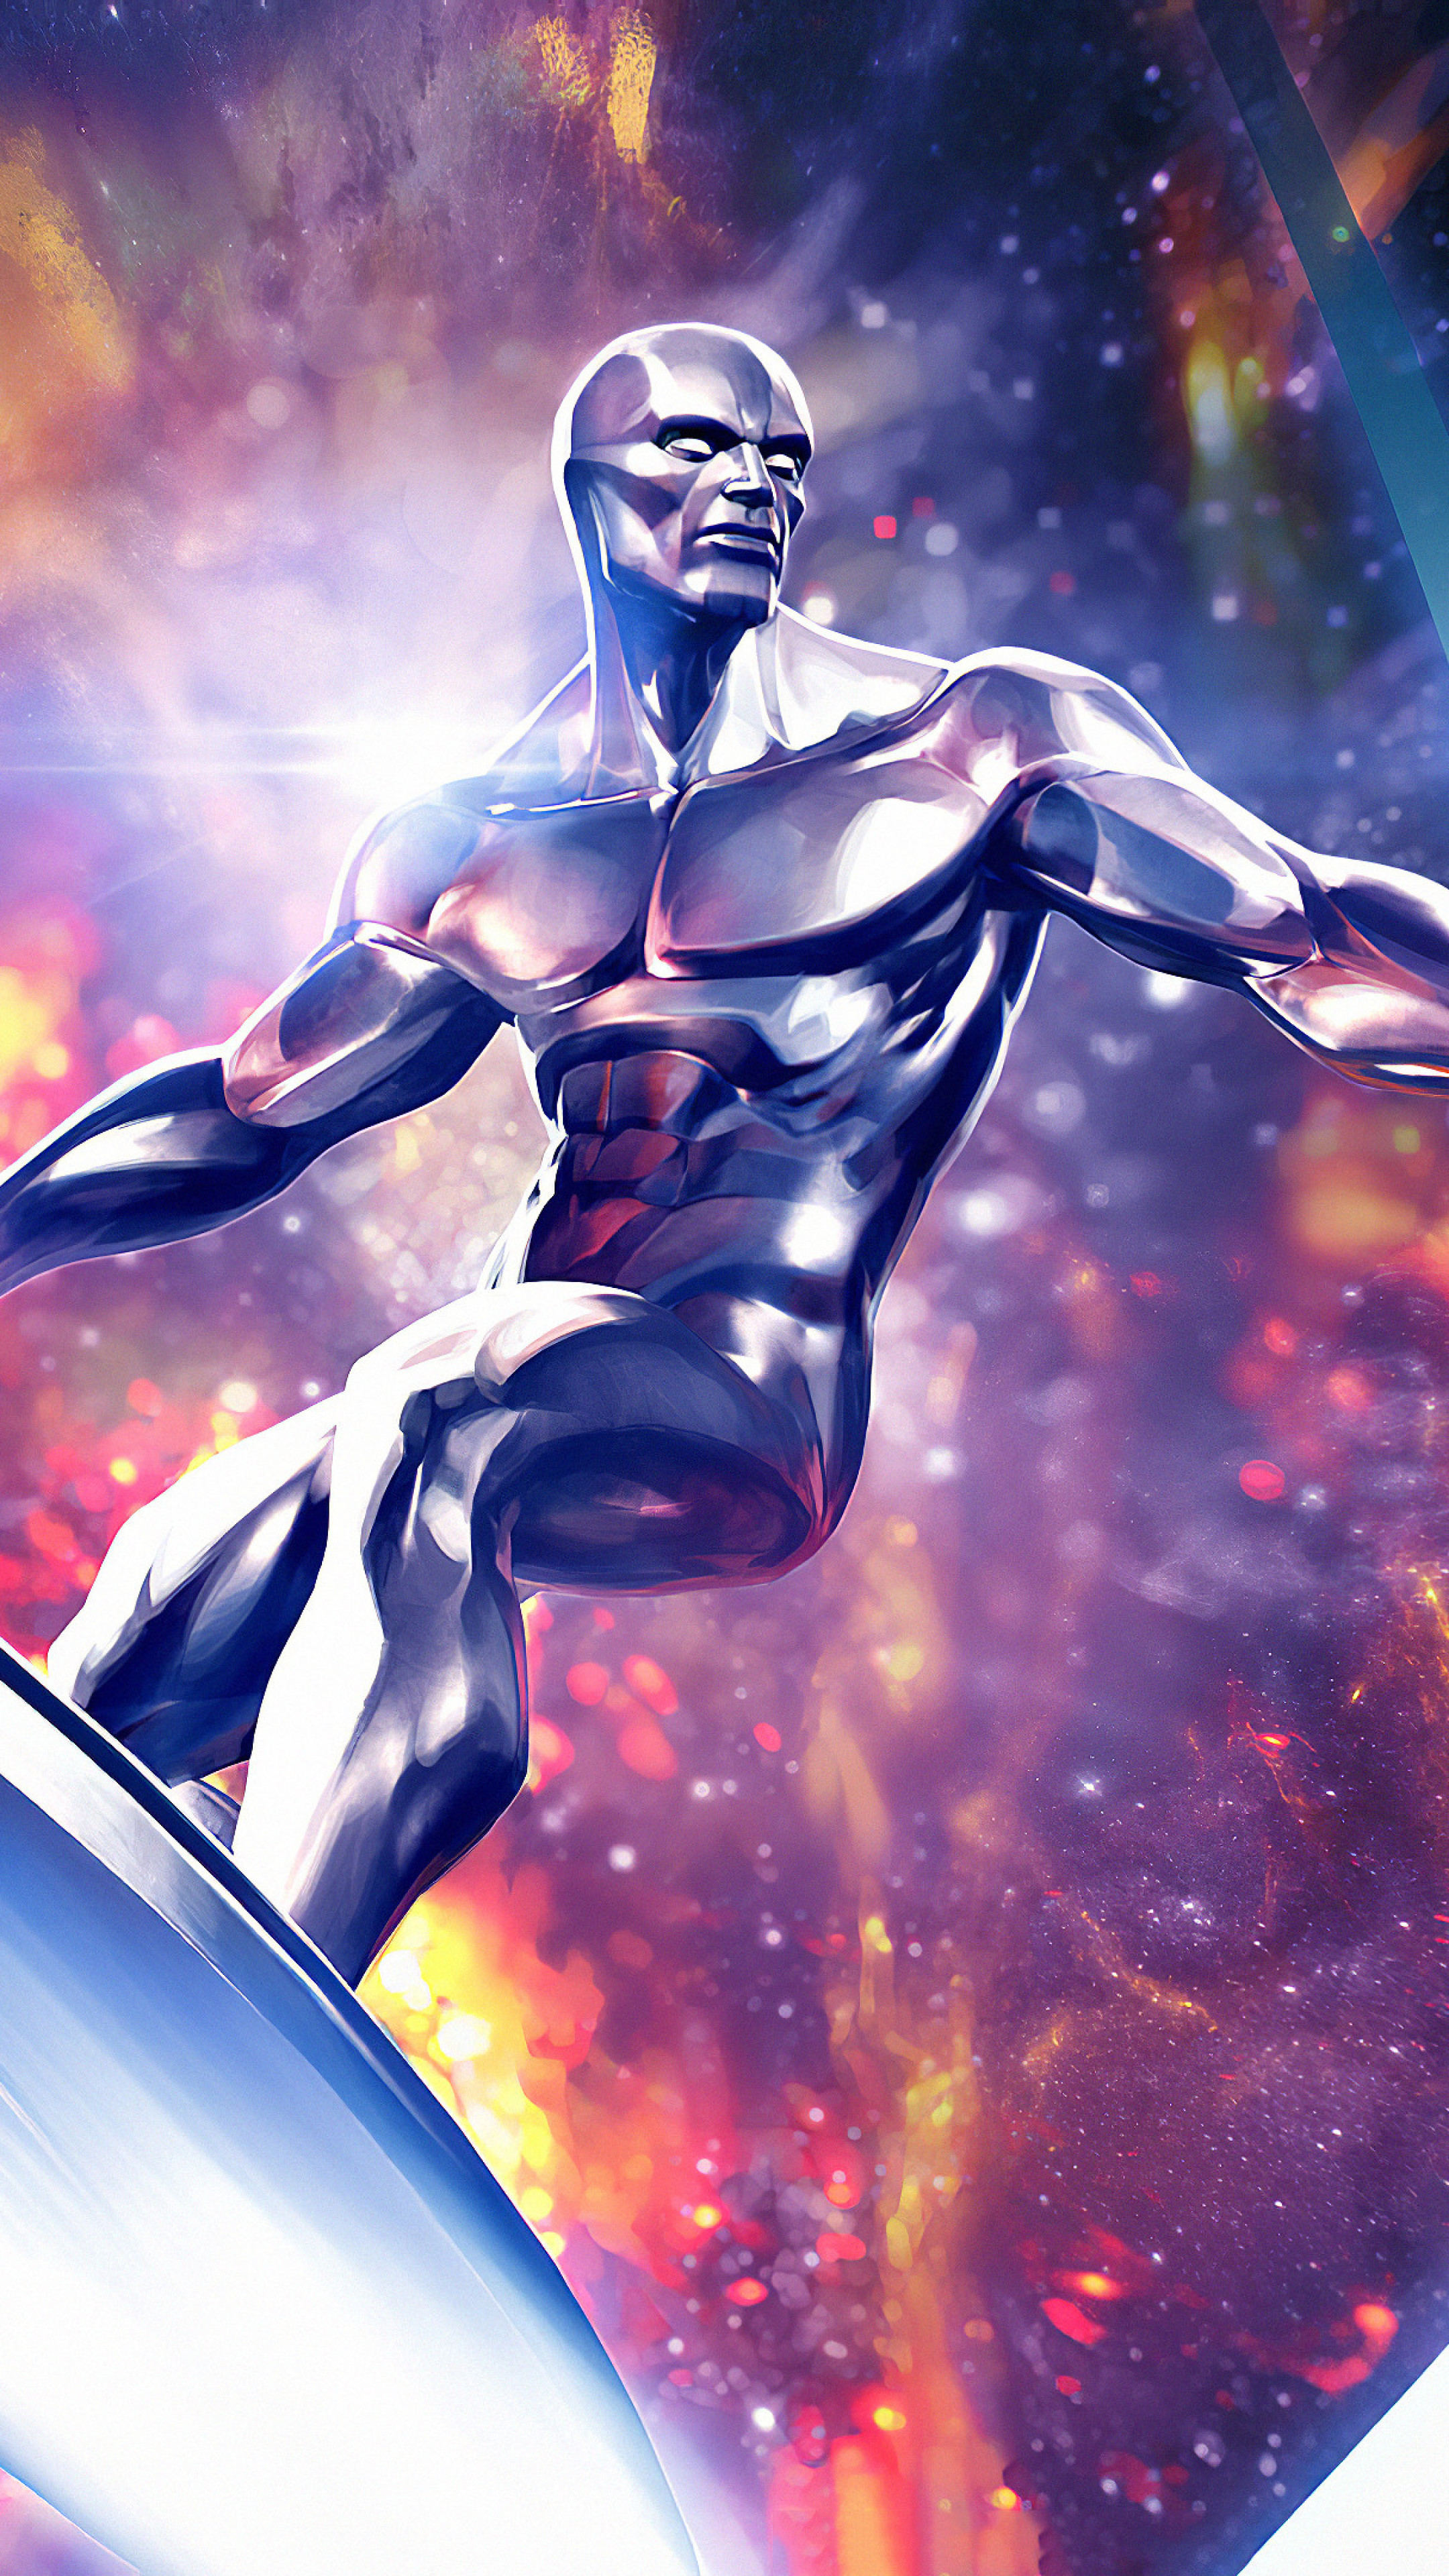 Silver Surfer Contest Of Champions - HD Wallpaper 